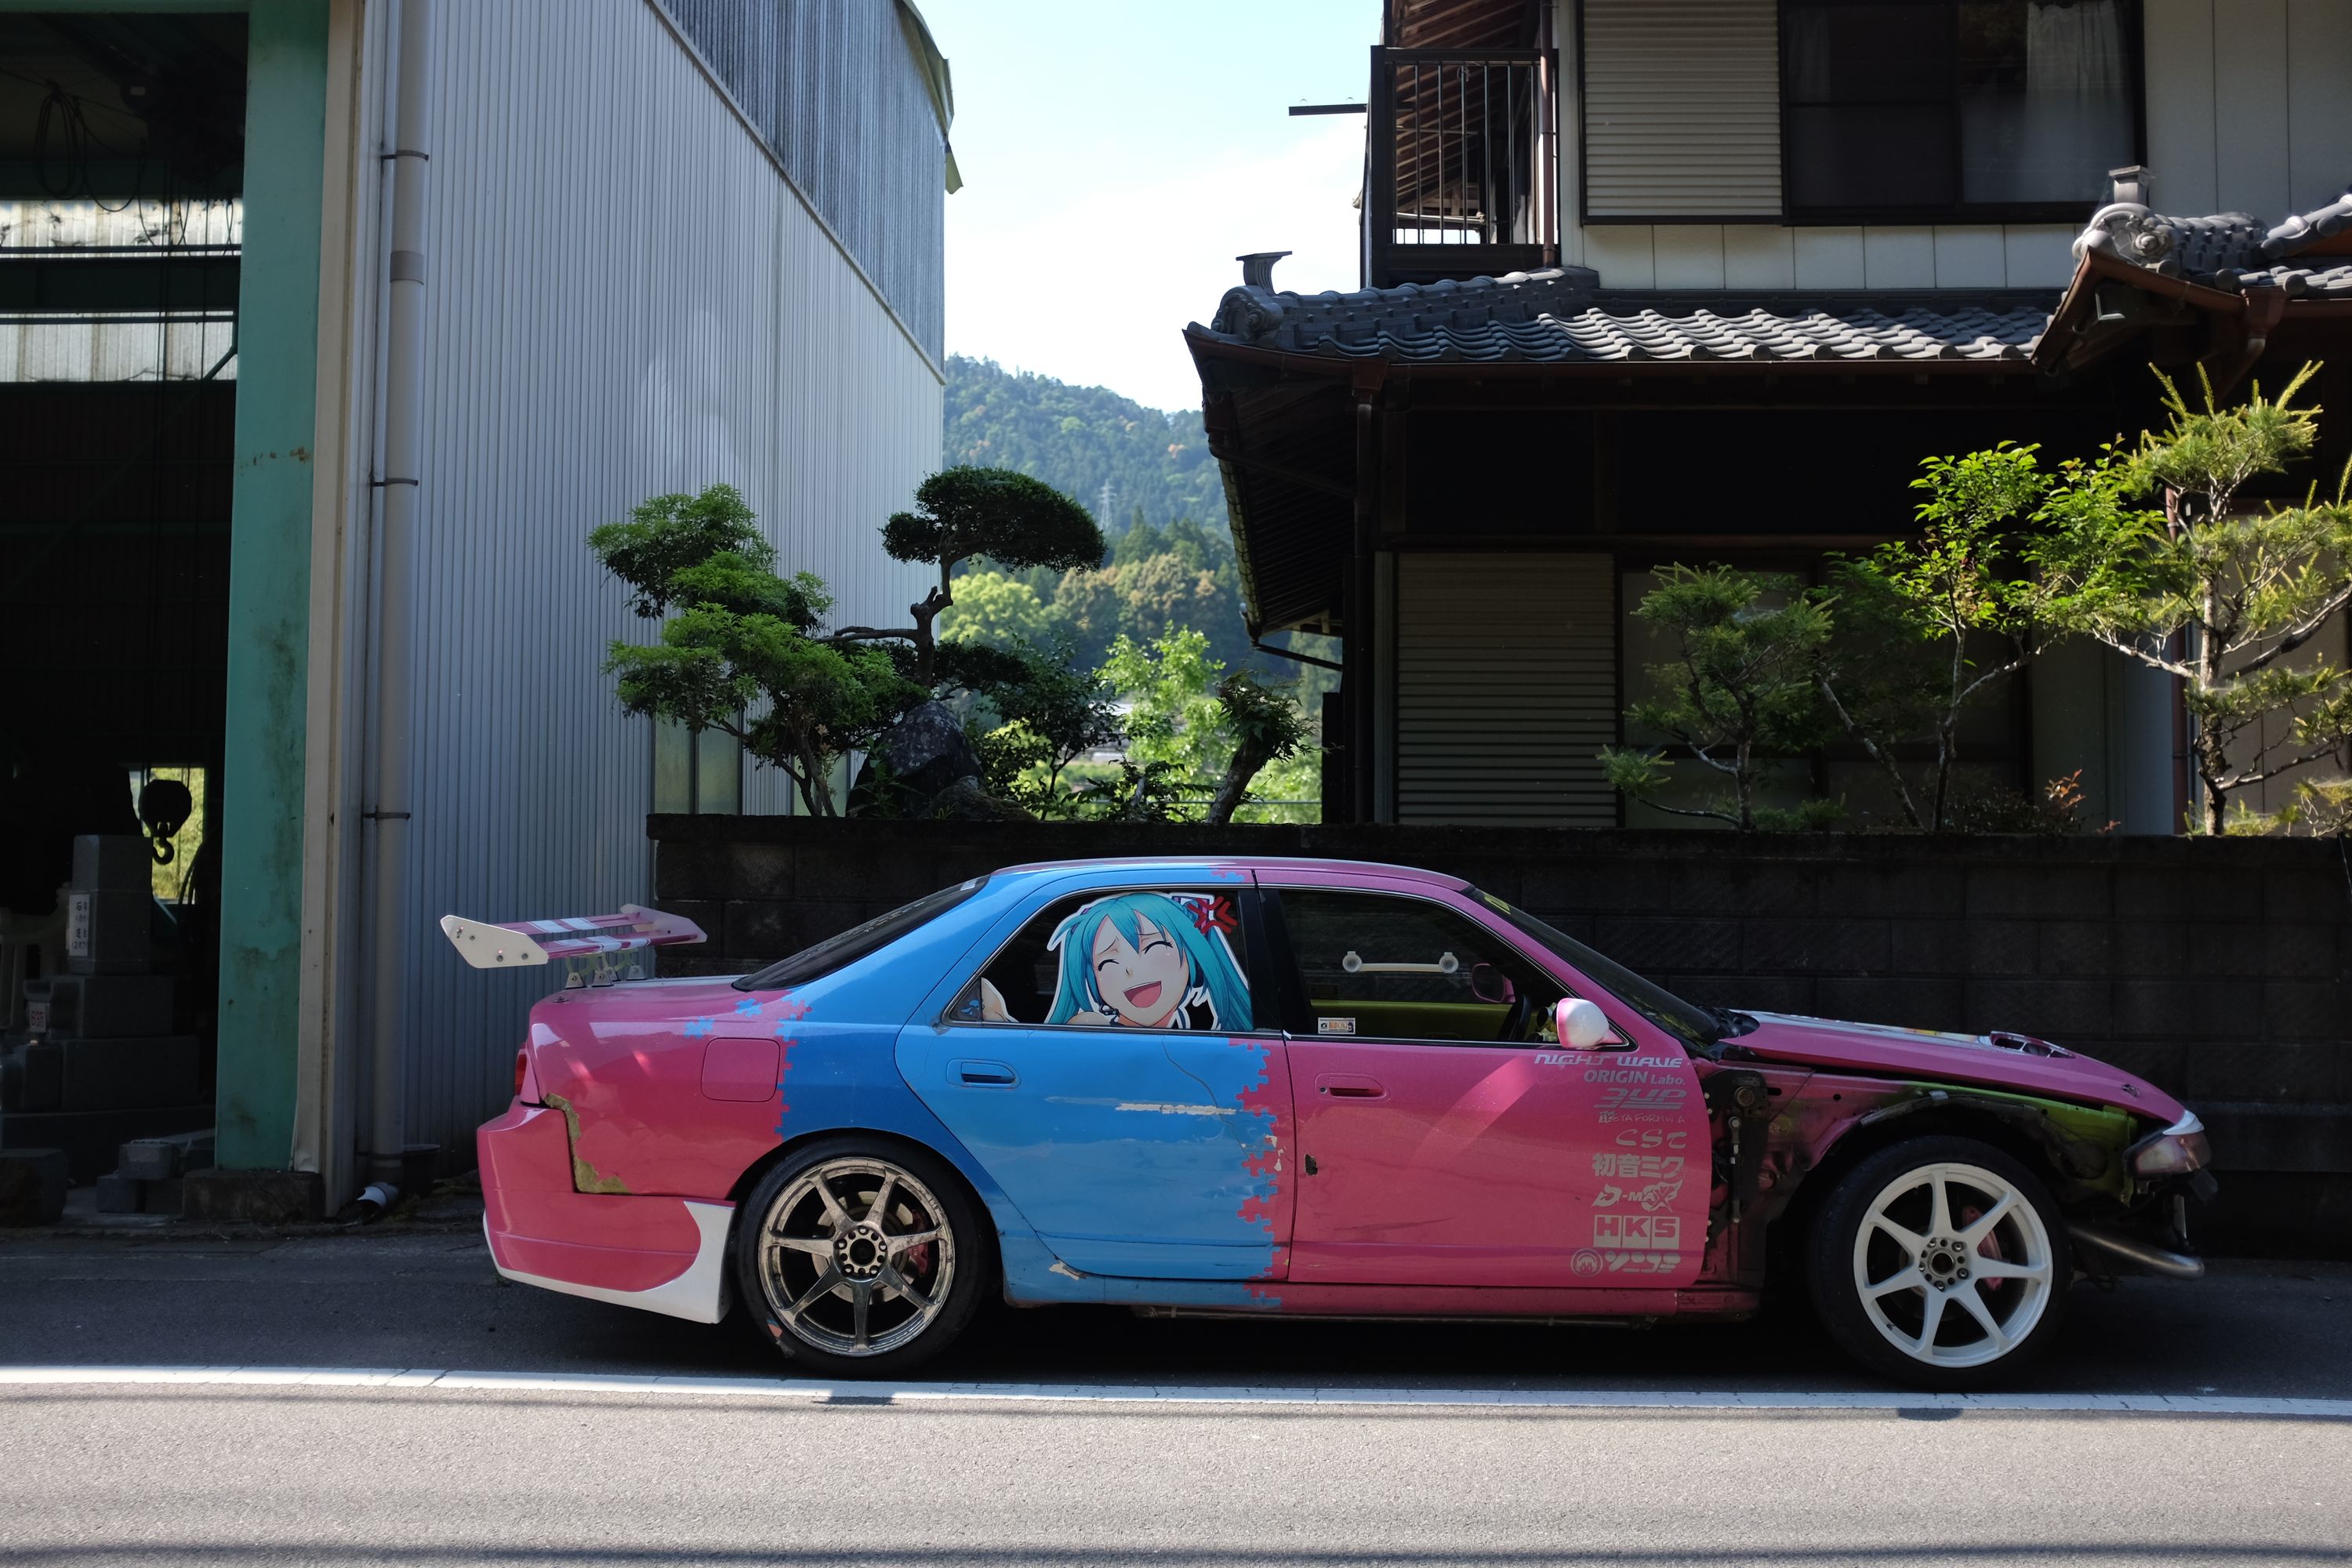 The car parked in front of a Japanese house.